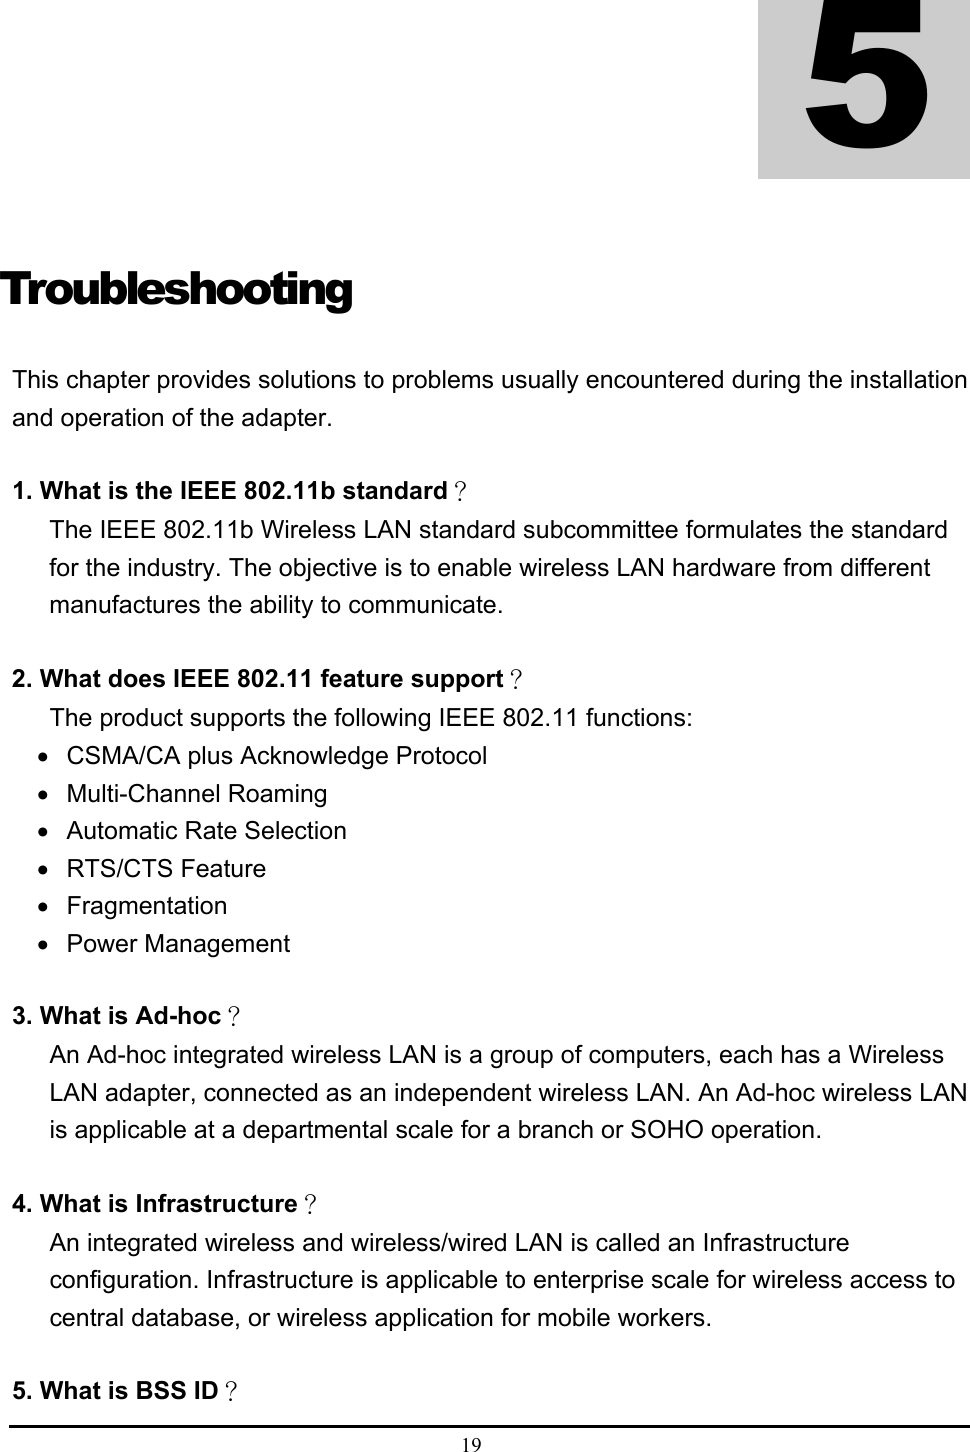  19  Troubleshooting This chapter provides solutions to problems usually encountered during the installation and operation of the adapter.  1. What is the IEEE 802.11b standard？ The IEEE 802.11b Wireless LAN standard subcommittee formulates the standard for the industry. The objective is to enable wireless LAN hardware from different manufactures the ability to communicate.  2. What does IEEE 802.11 feature support？ The product supports the following IEEE 802.11 functions: •  CSMA/CA plus Acknowledge Protocol • Multi-Channel Roaming •  Automatic Rate Selection • RTS/CTS Feature • Fragmentation • Power Management  3. What is Ad-hoc？ An Ad-hoc integrated wireless LAN is a group of computers, each has a Wireless LAN adapter, connected as an independent wireless LAN. An Ad-hoc wireless LAN is applicable at a departmental scale for a branch or SOHO operation.  4. What is Infrastructure？ An integrated wireless and wireless/wired LAN is called an Infrastructure configuration. Infrastructure is applicable to enterprise scale for wireless access to central database, or wireless application for mobile workers.  5. What is BSS ID？  5 